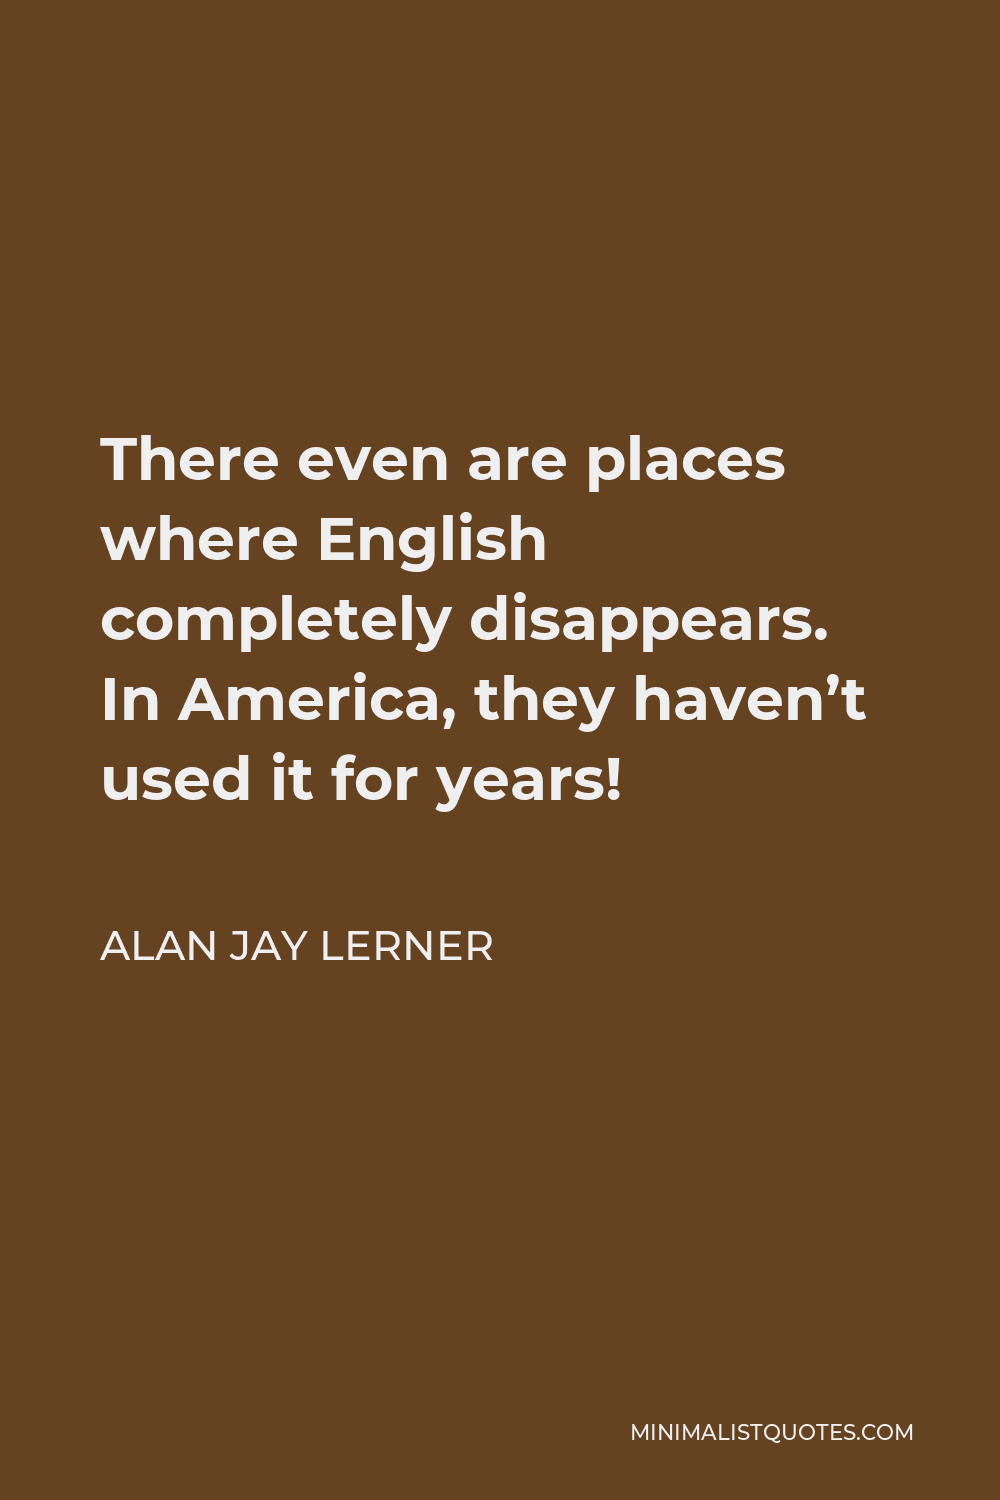 Alan Jay Lerner Quote - There even are places where English completely disappears. In America, they haven’t used it for years!